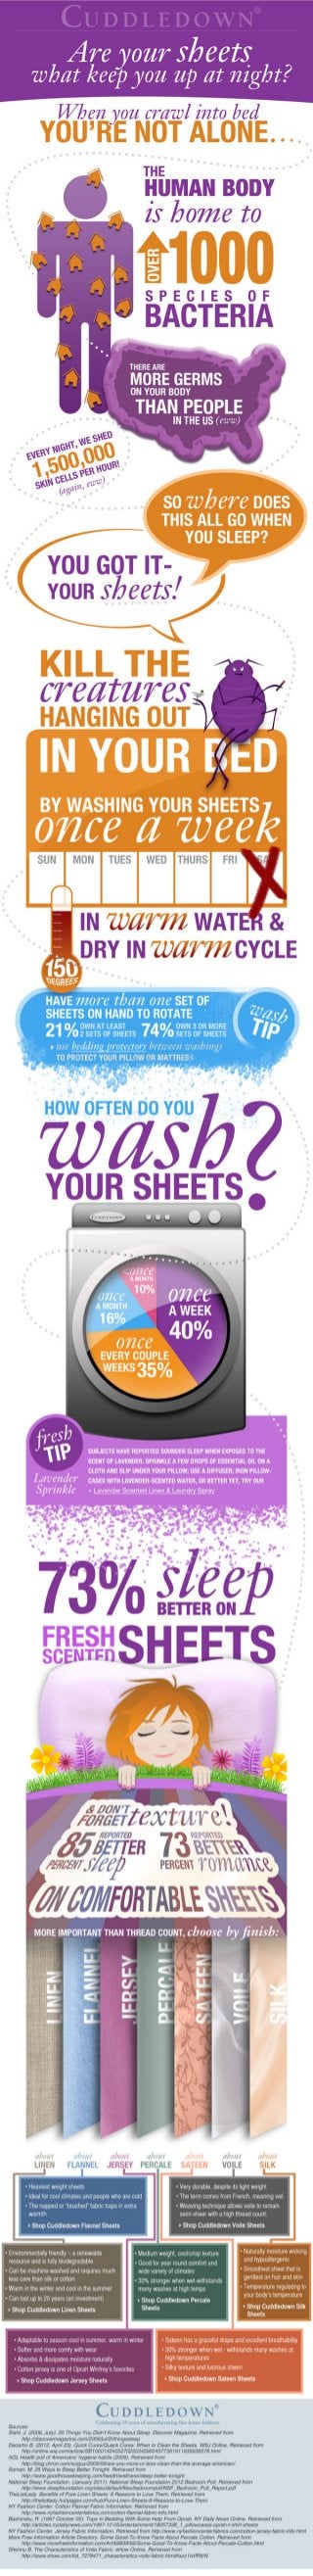 Are Your Sheets What Keep You Up At Night? (Or what’s living in them?)